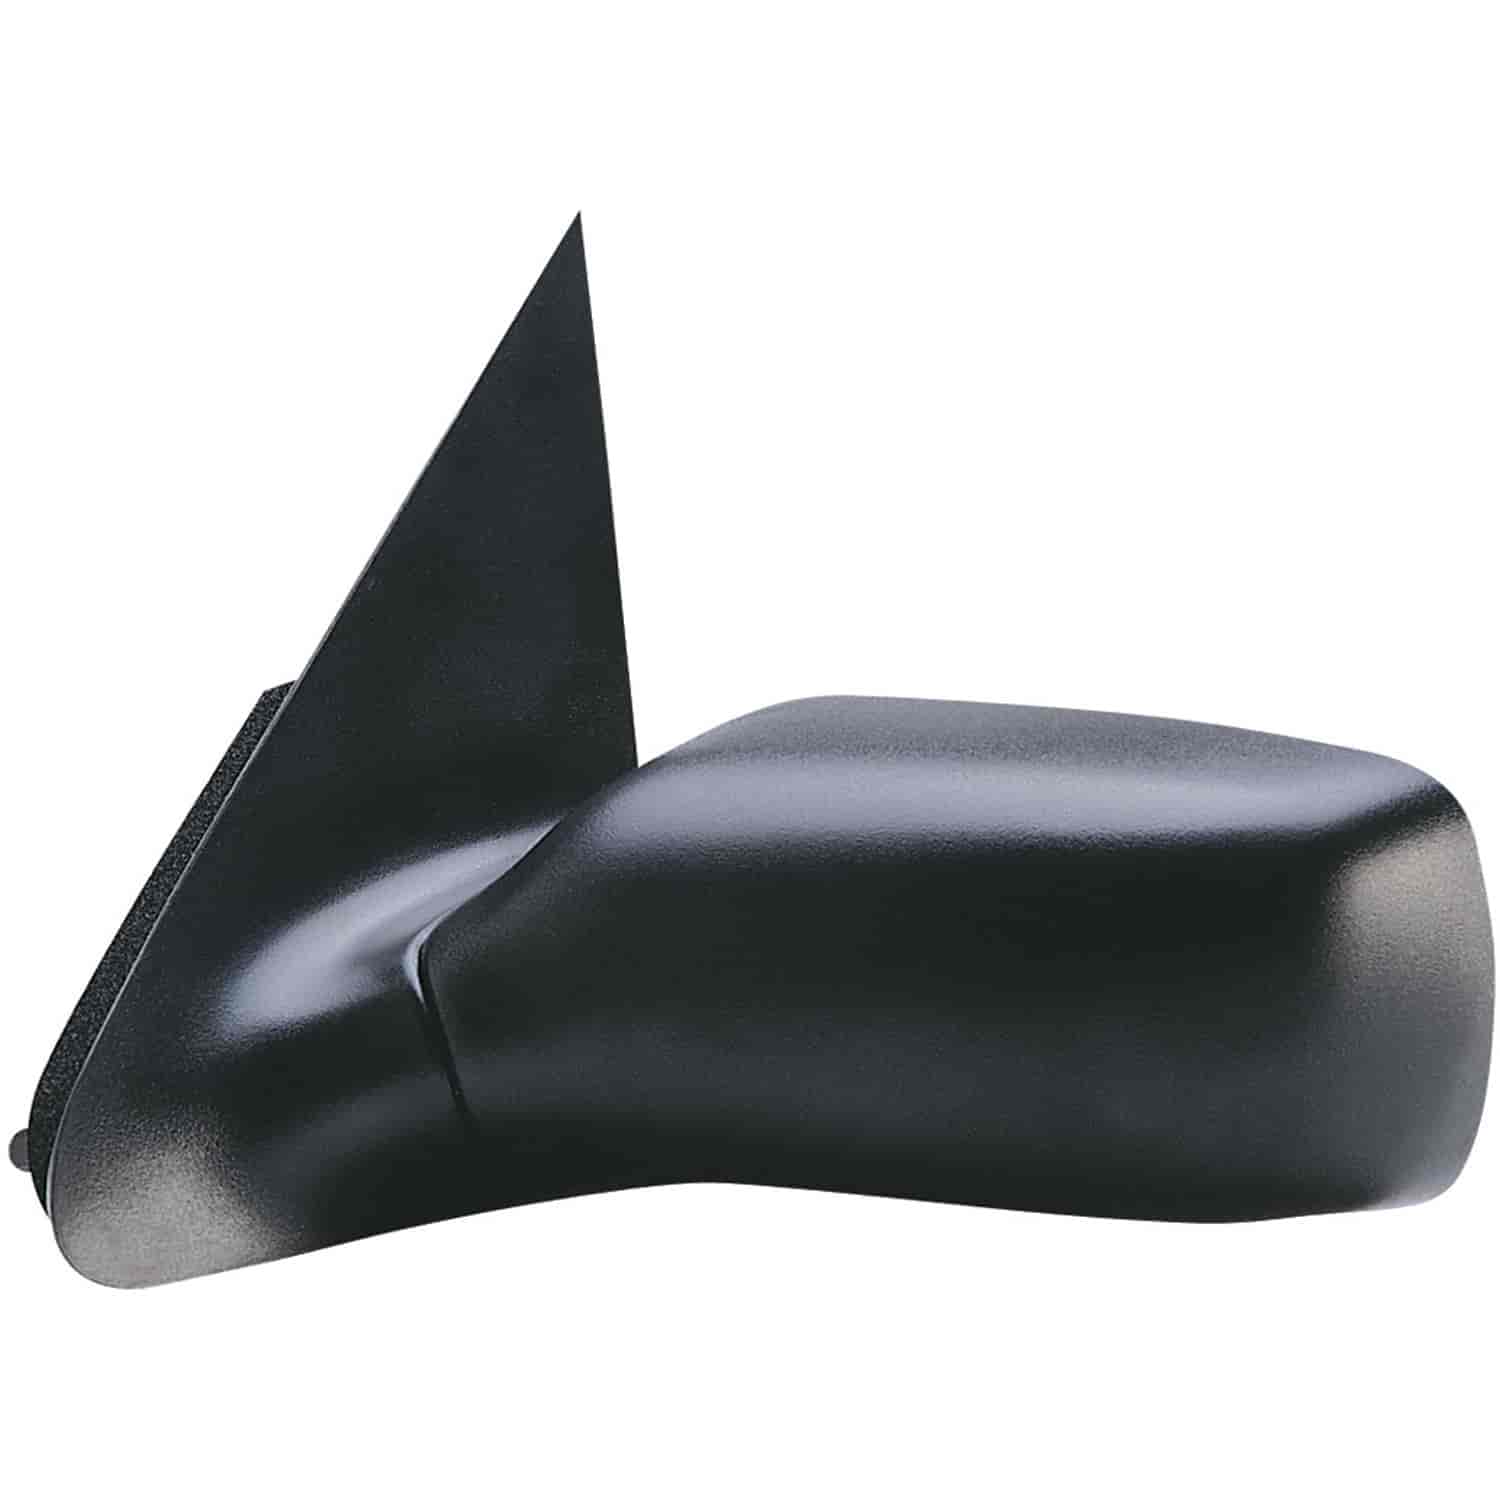 OEM Style Replacement mirror for 97-00 Ford Contou Mercury Mystique driver side mirror tested to fit